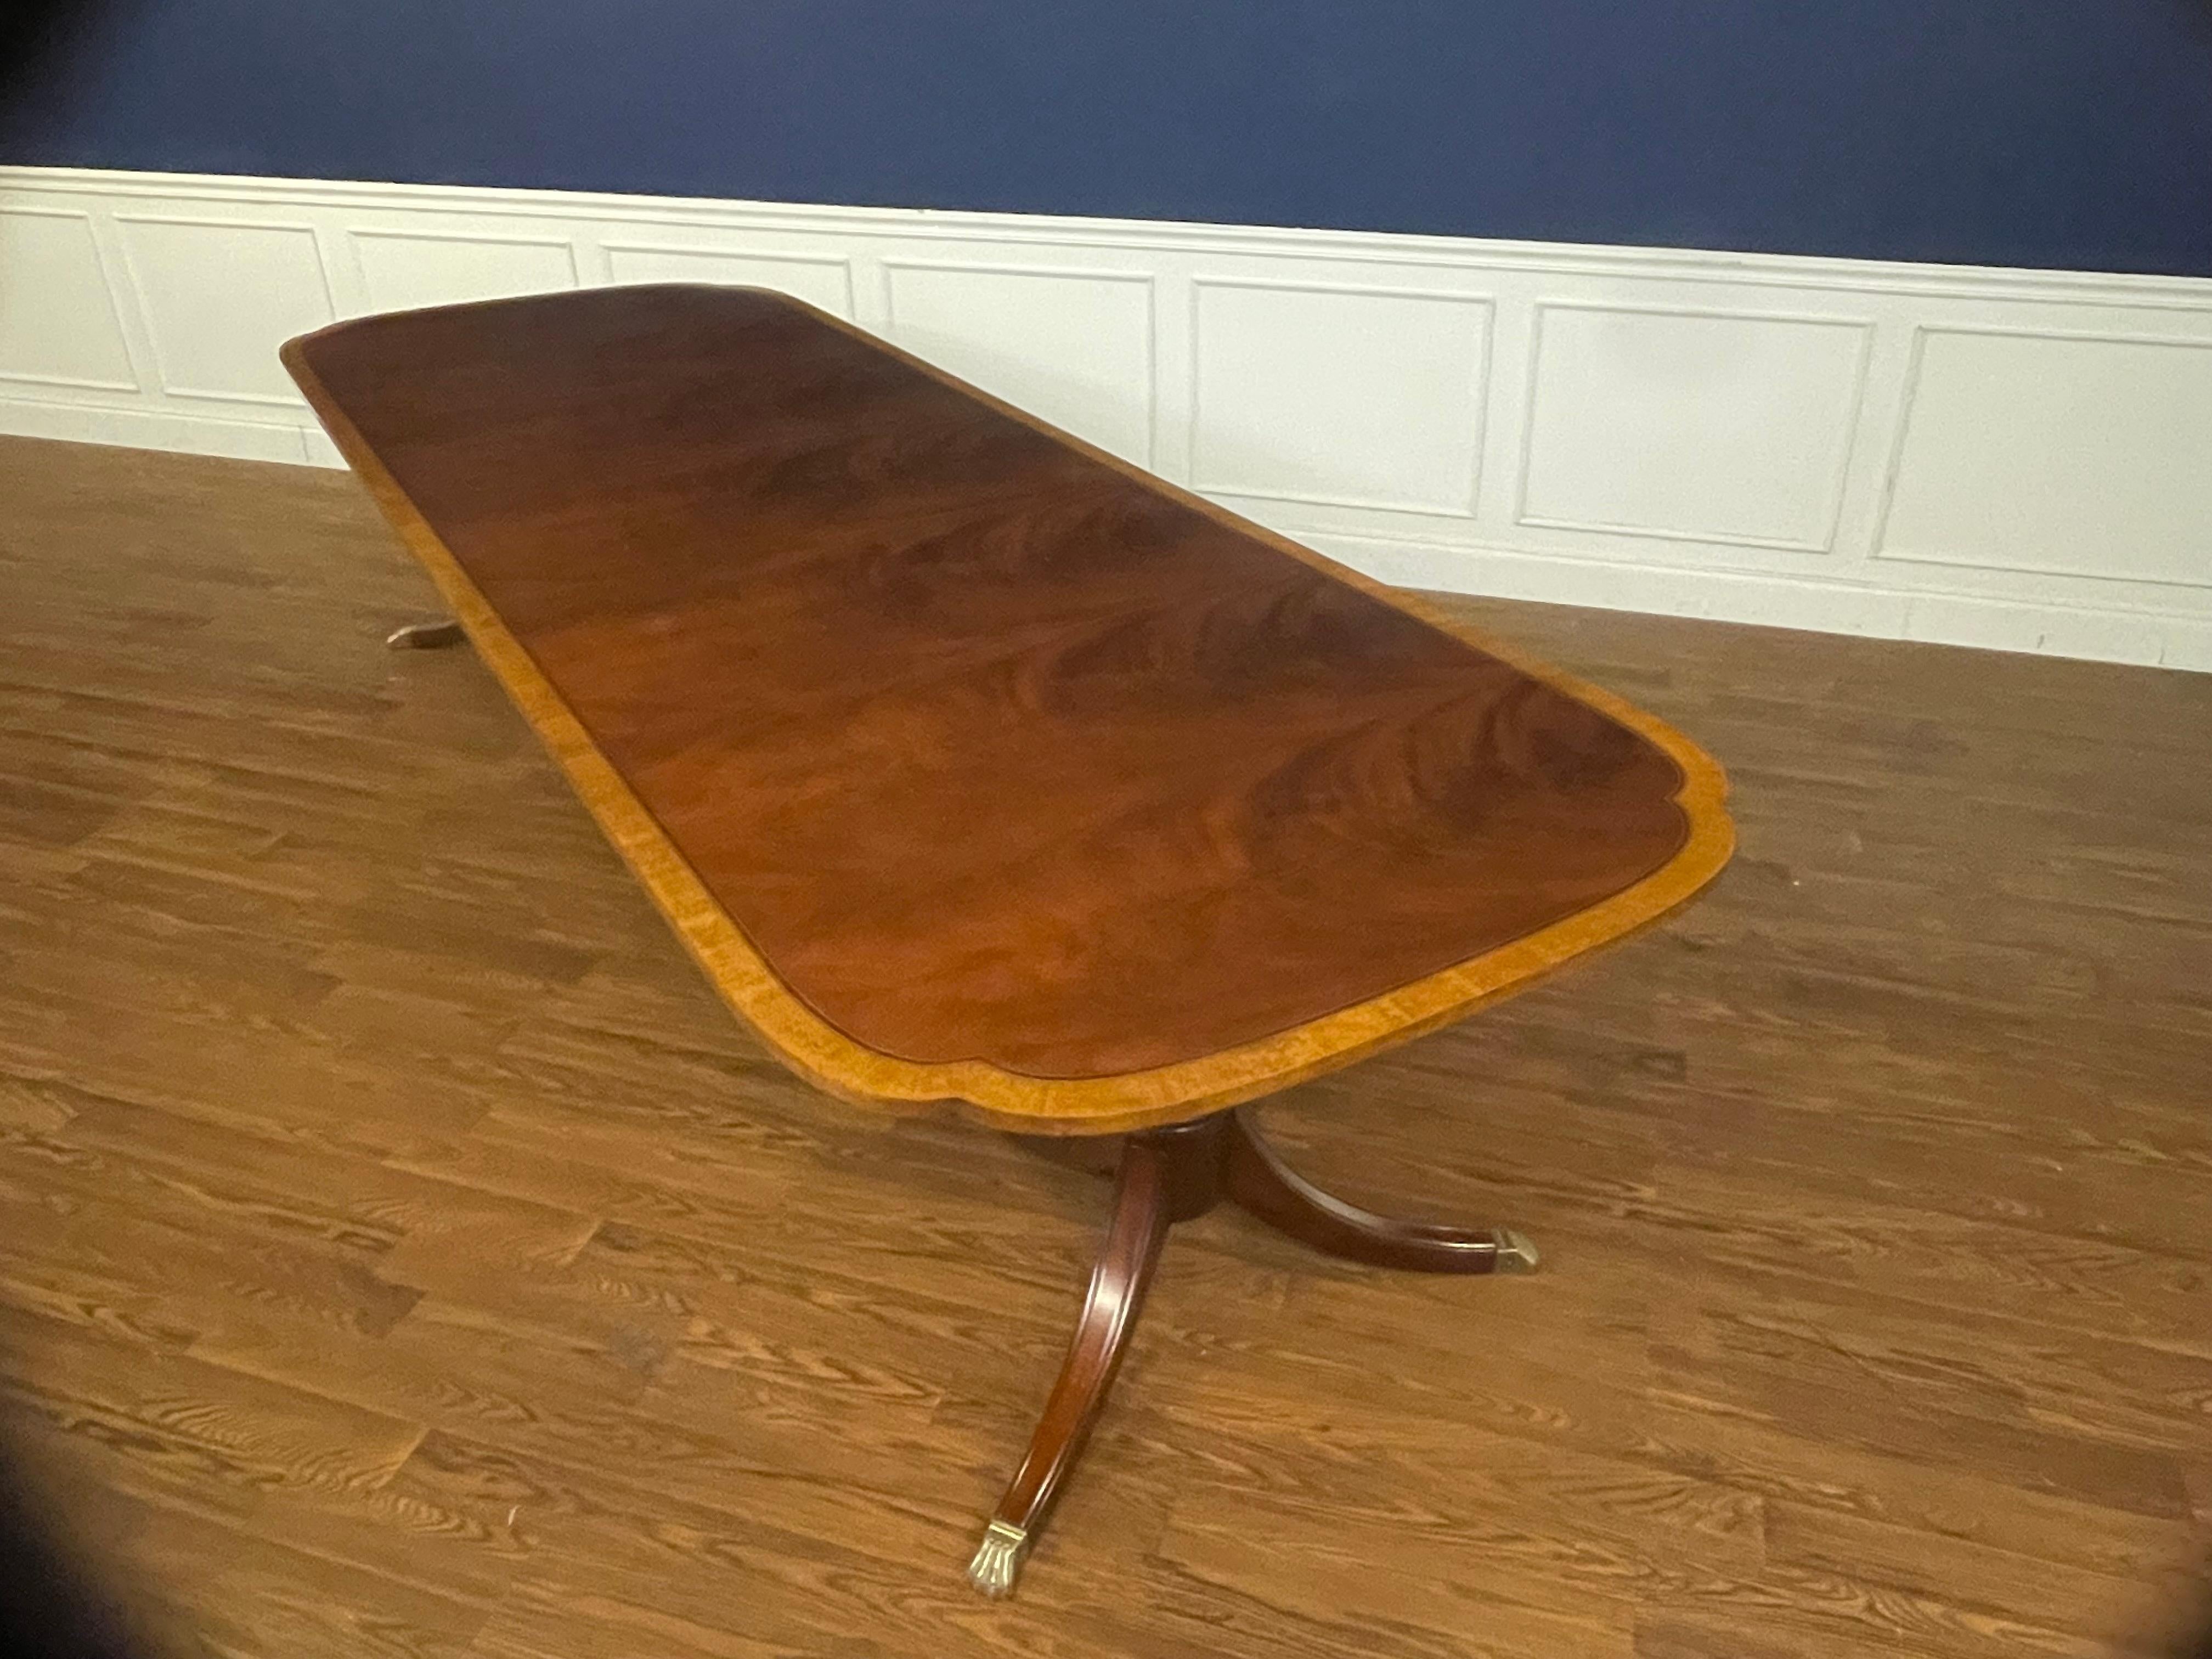 Mahogany Scallop Cornered Dining Table by Leighton Hall - Showroom Sample 4